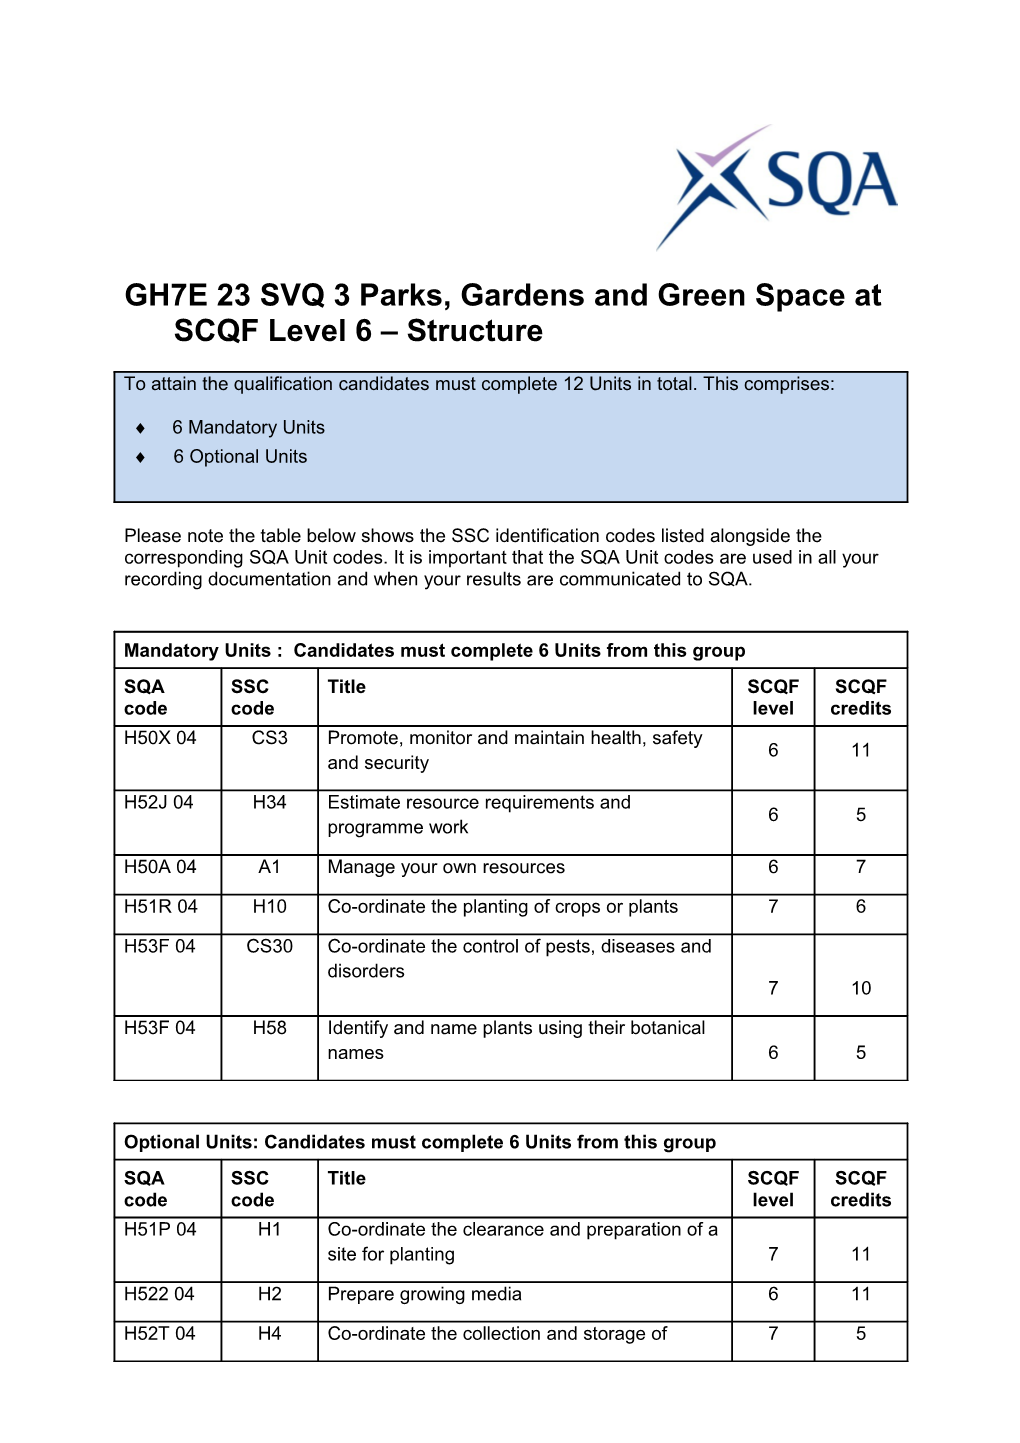 GH7E 23 SVQ 3 Parks, Gardens and Green Space at SCQF Level 6 Structure